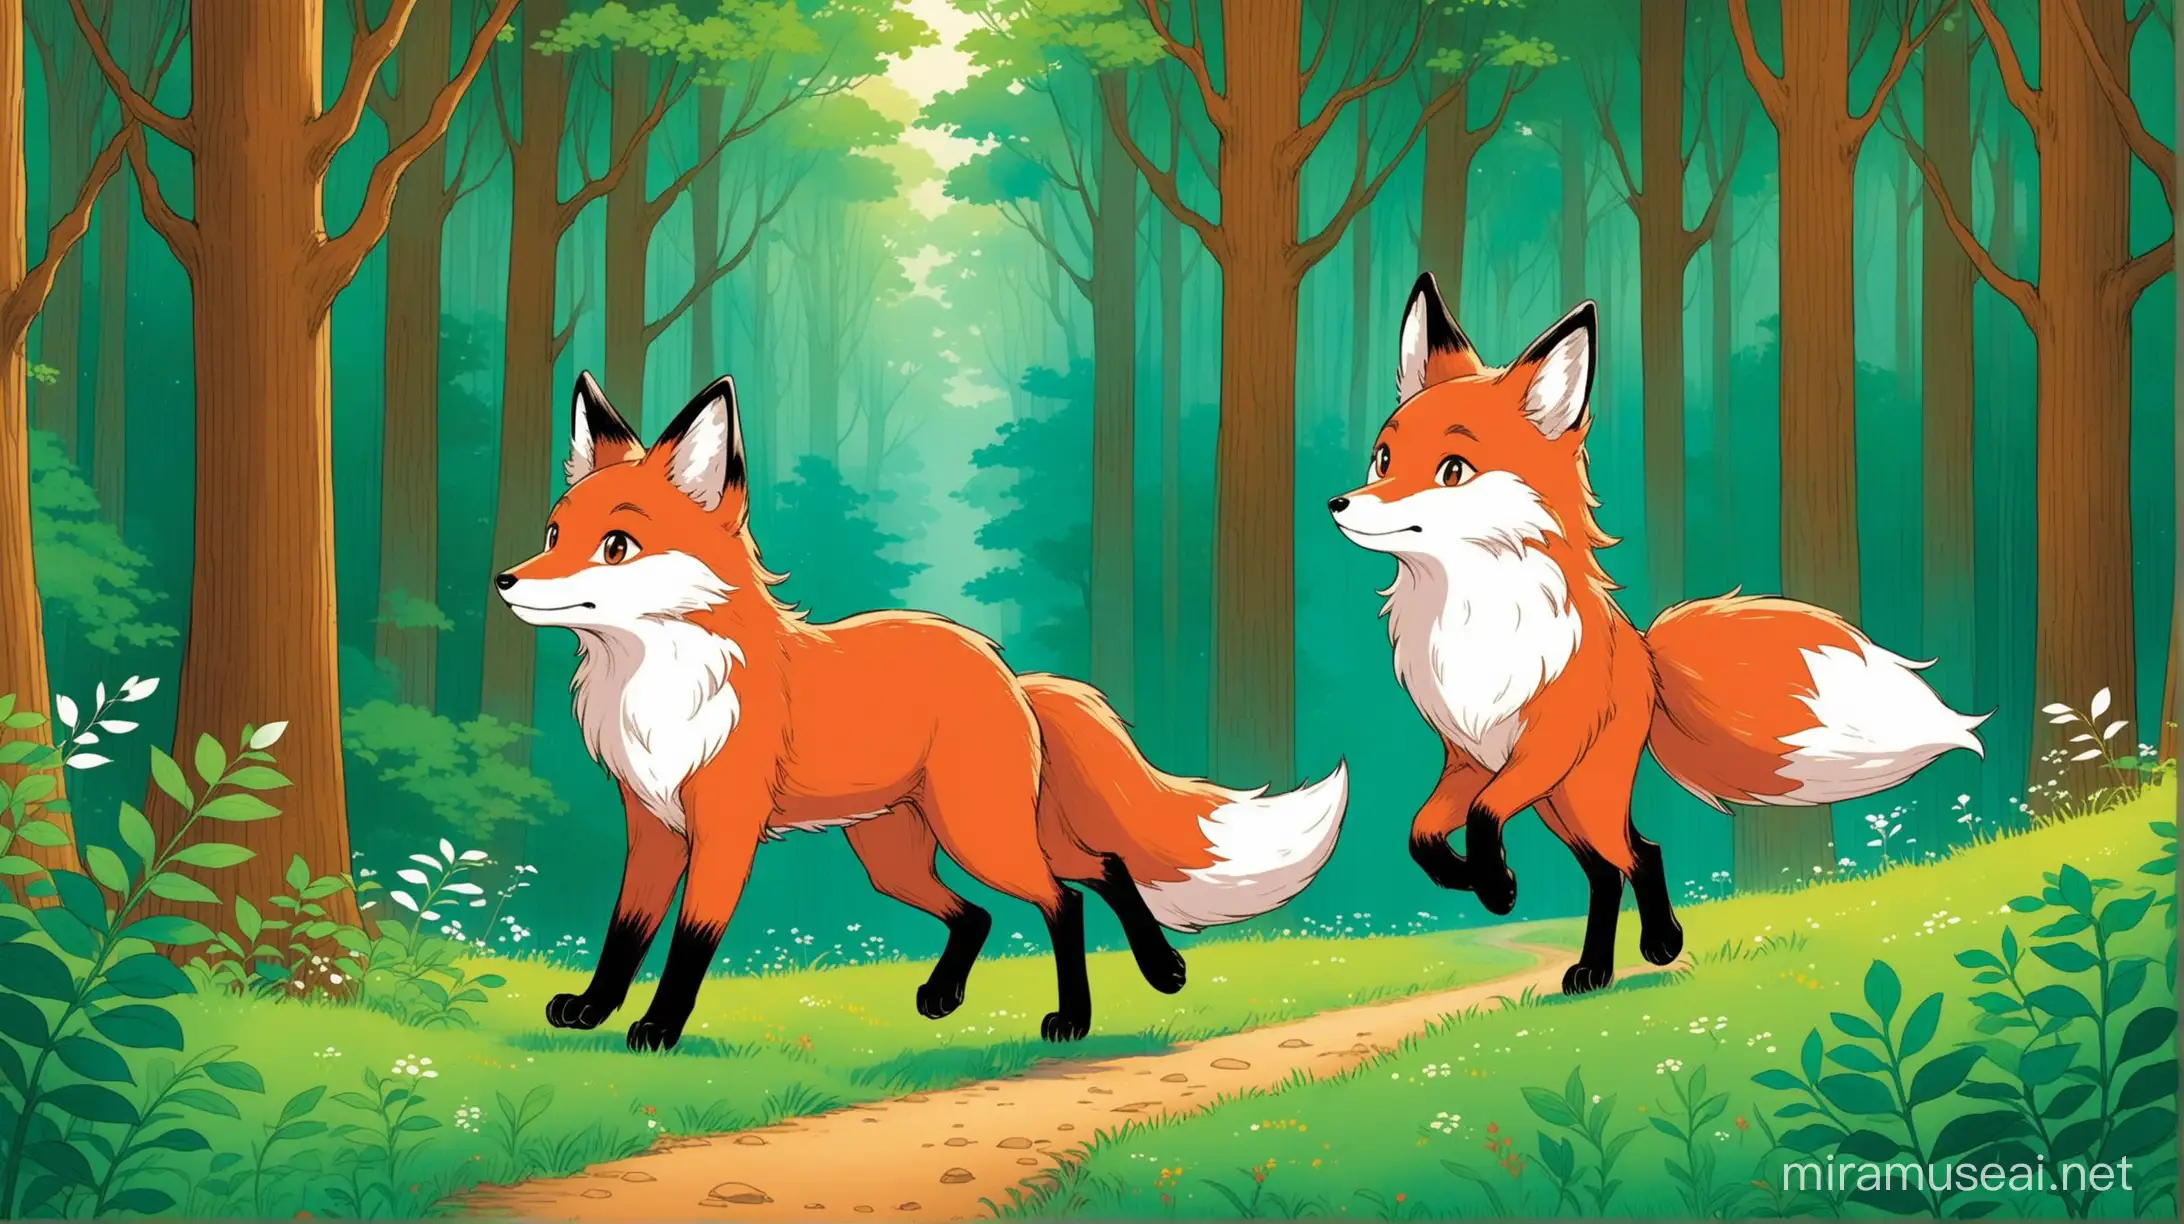 Enchanting Ghibli Style Forest Stroll with White and Red Foxes